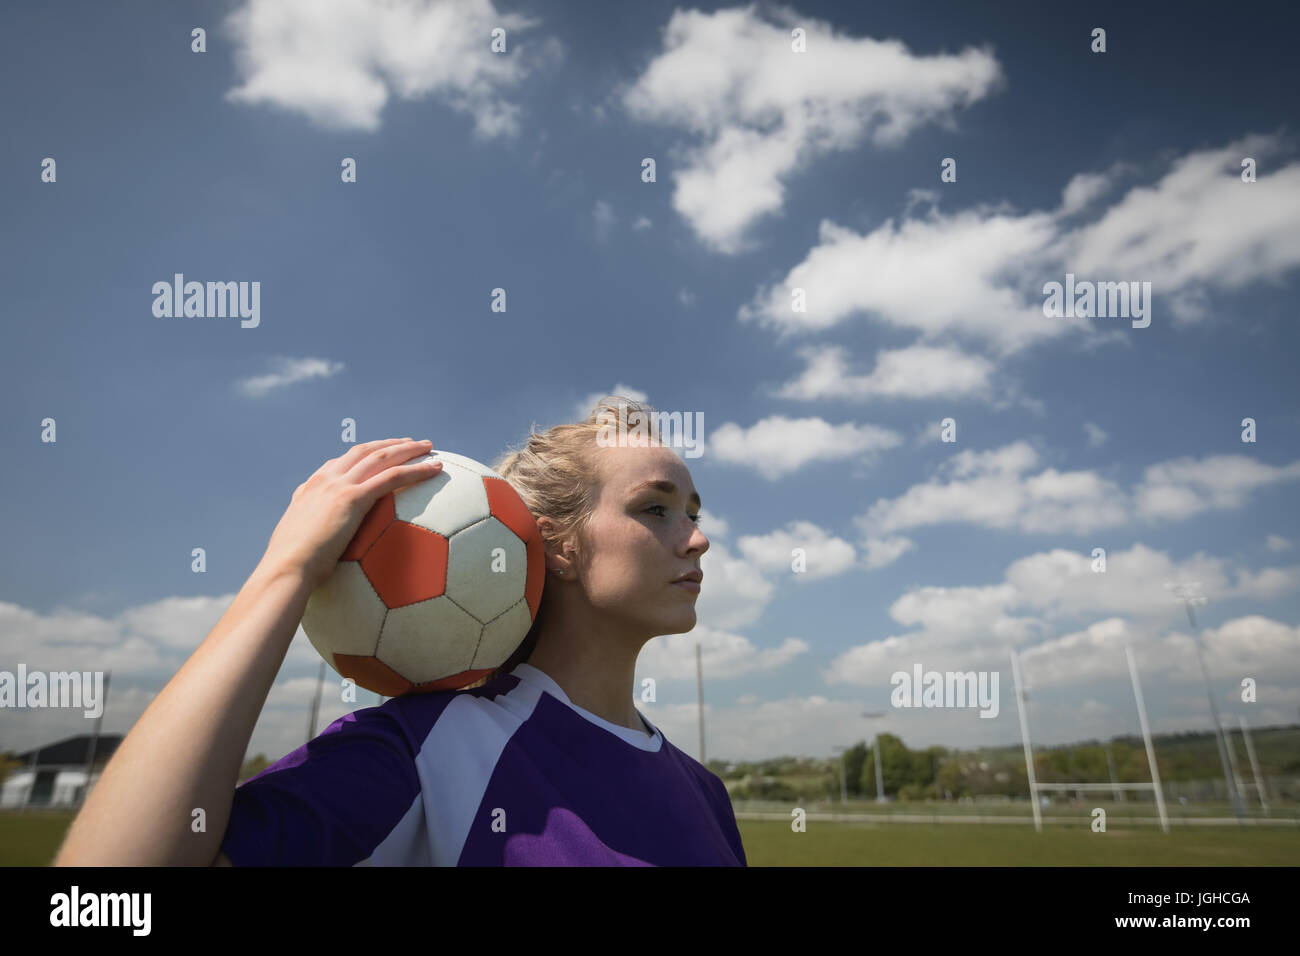 Thoughtful woman holding soccer ball on field against cloudy sky Banque D'Images